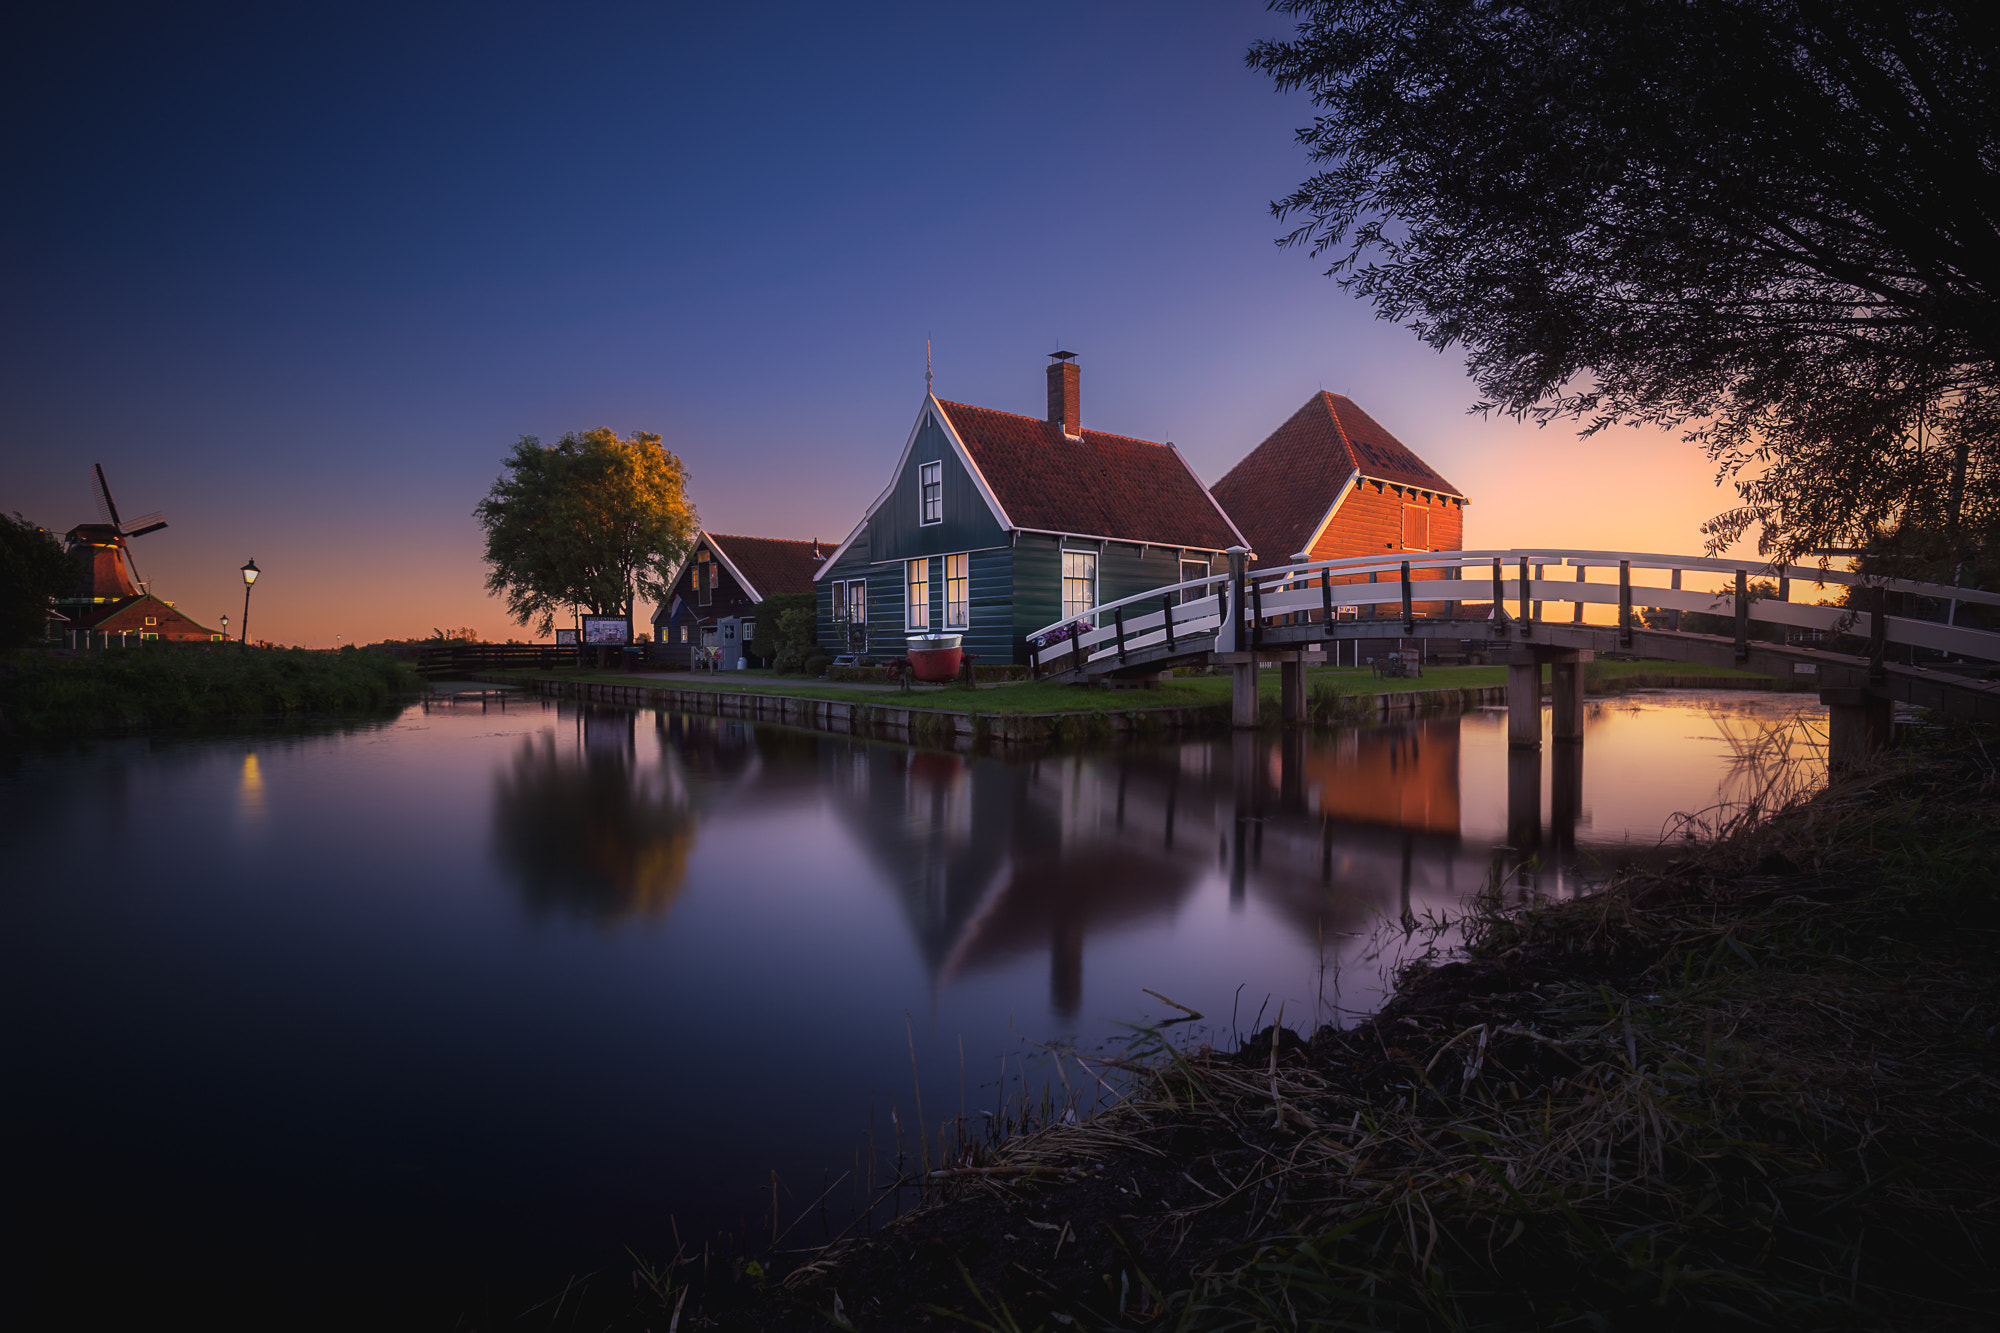 Sony a7 II sample photo. Early morning at the zaanse schans photography